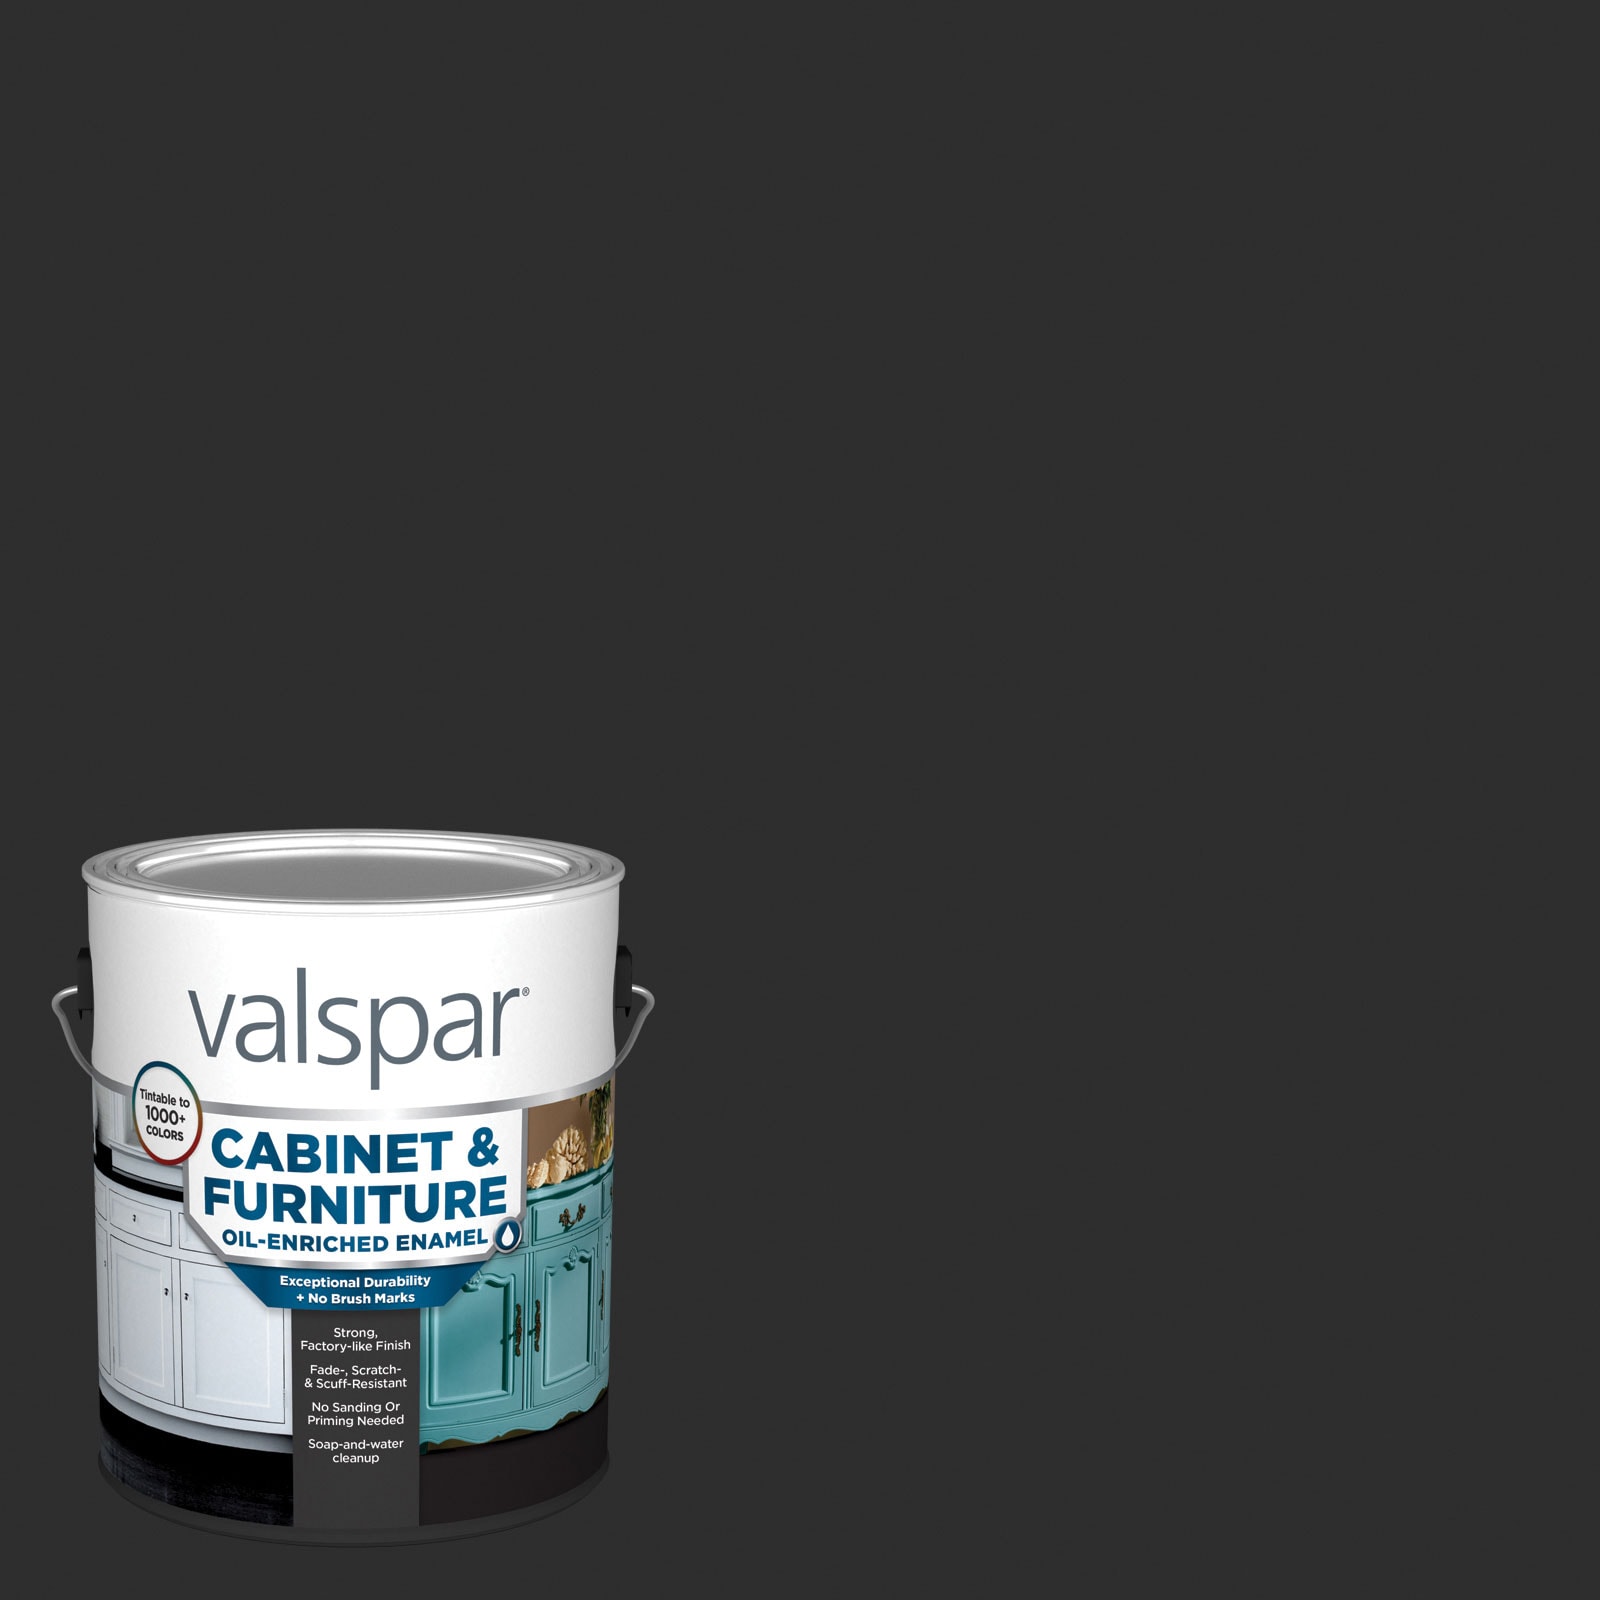 Valspar Semi-gloss Pure White Hgsw4006 Cabinet and Furniture Paint Enamel  (1-Gallon) at